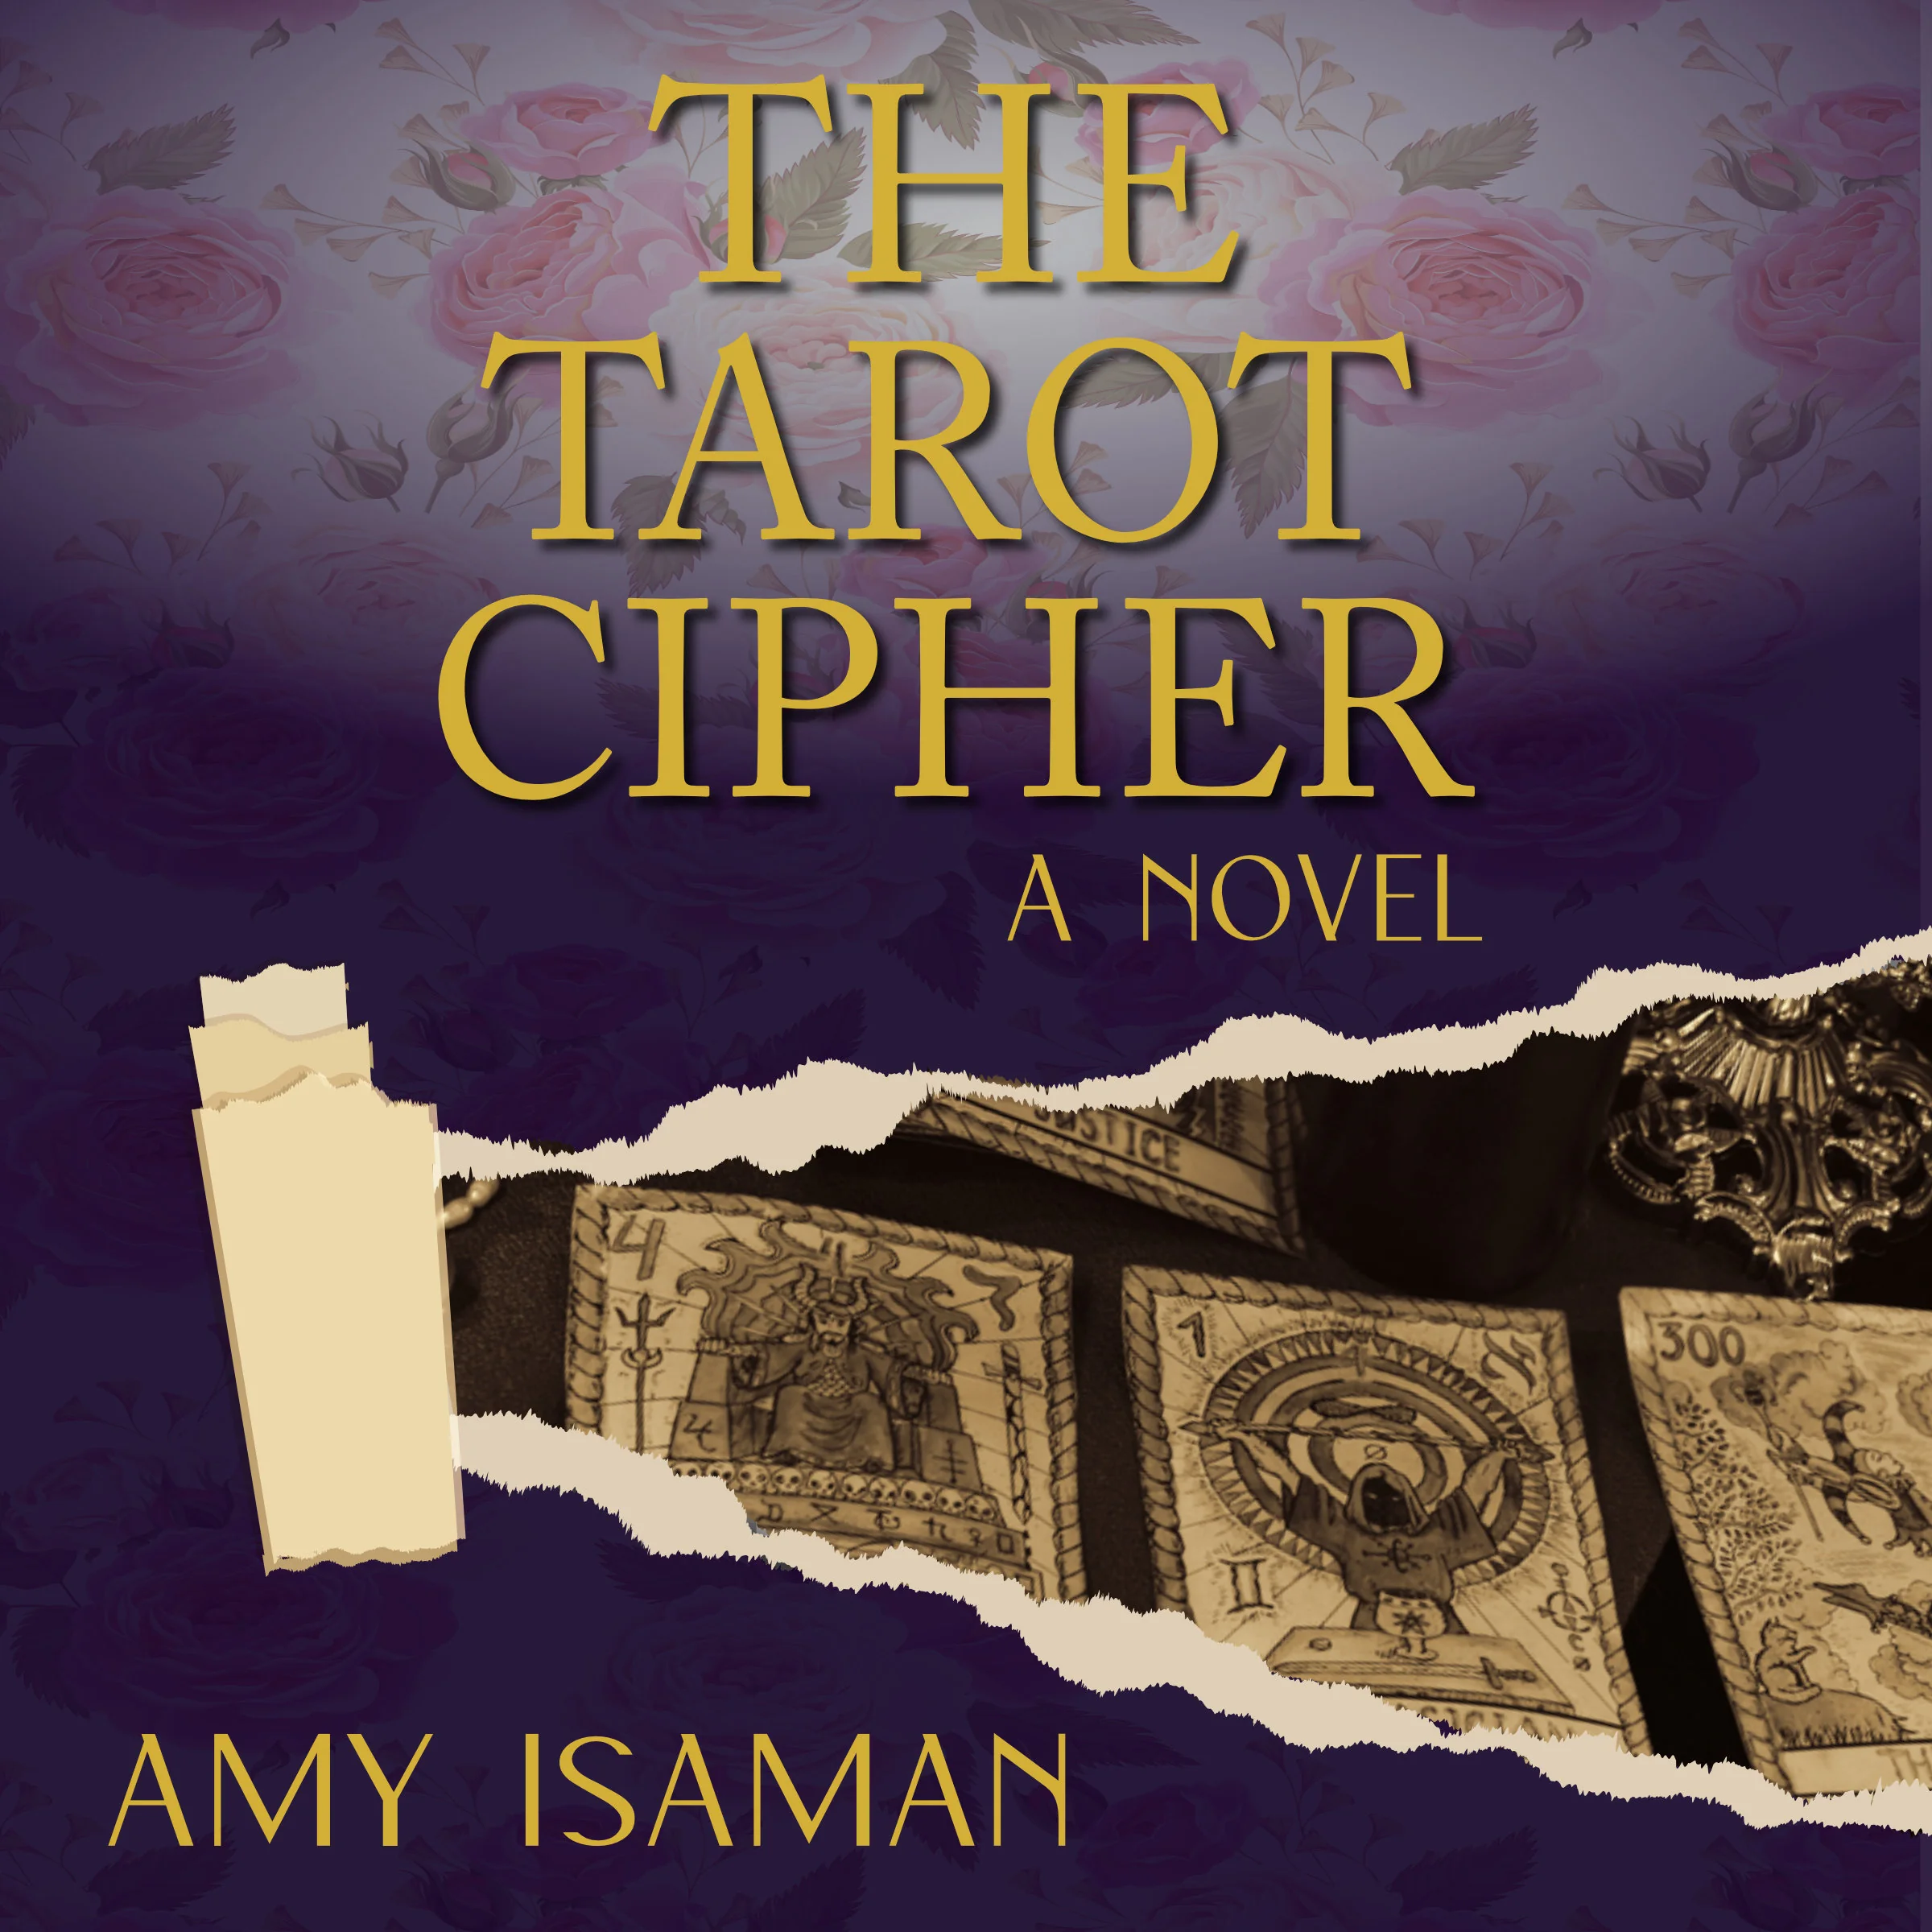 The Tarot Cipher by Amy Isaman